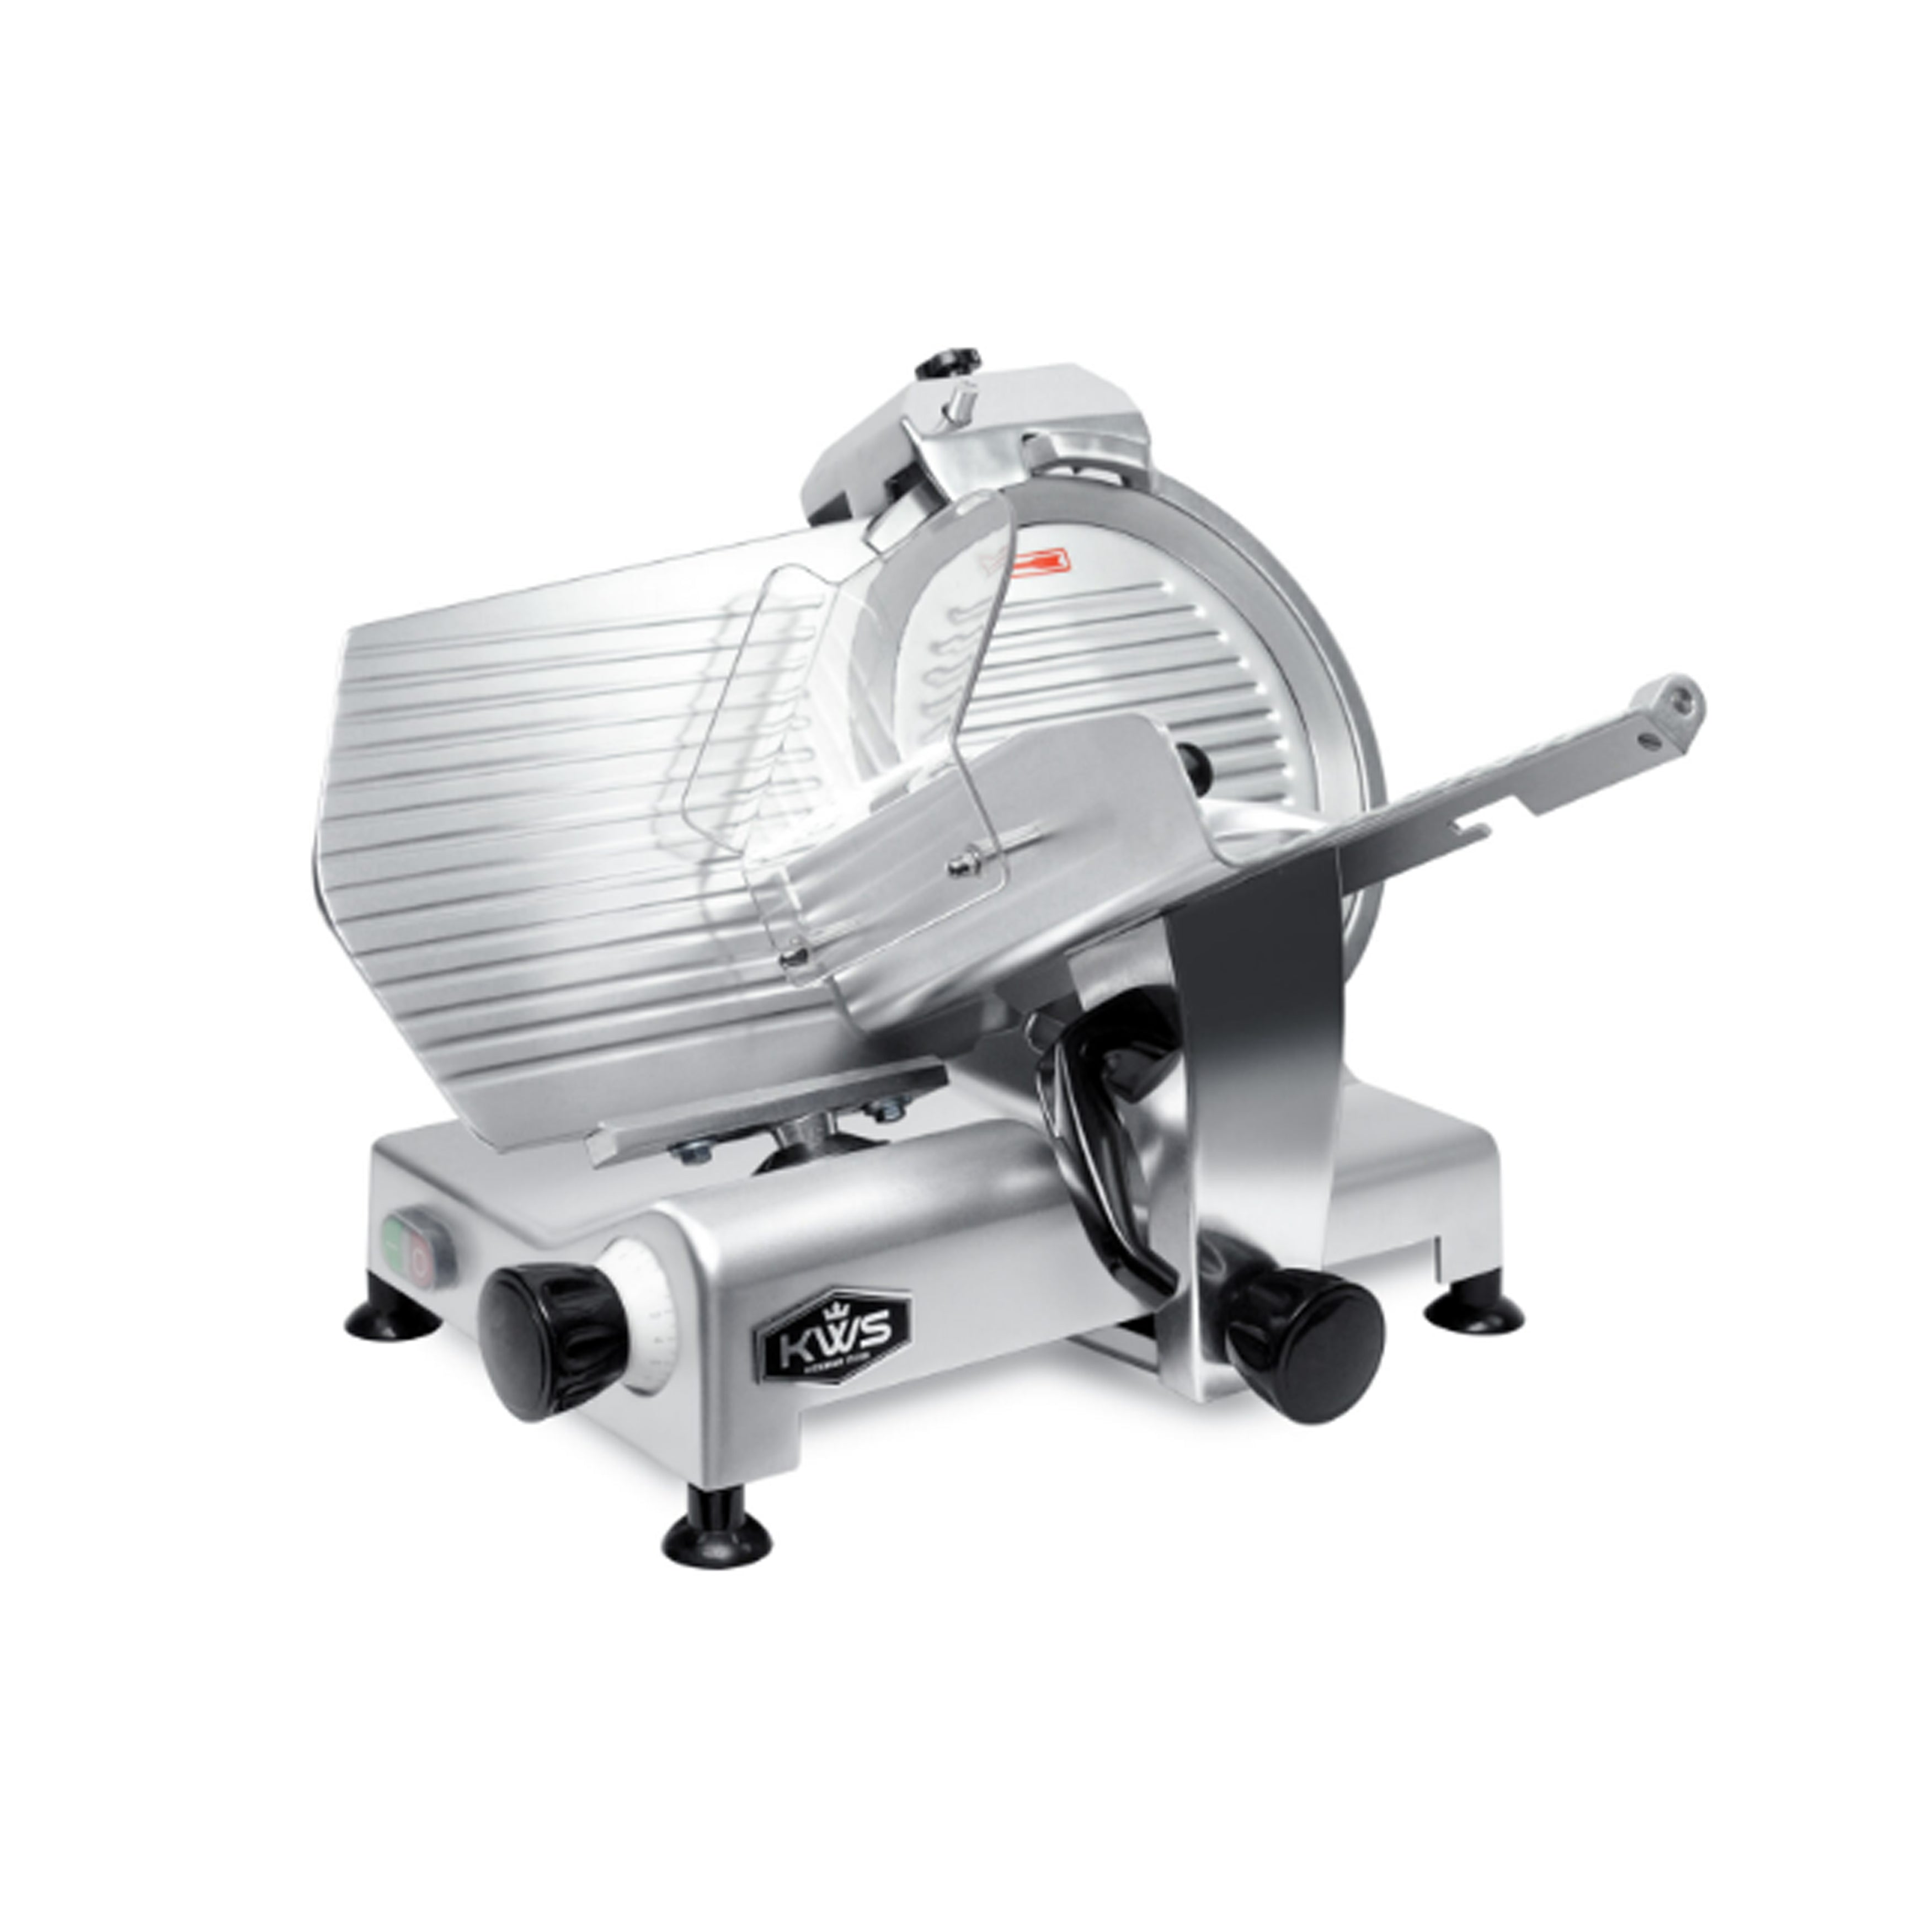 KWS - MS-12NS, Commercial 12″ Meat Slicer with Stainless Steel Blade